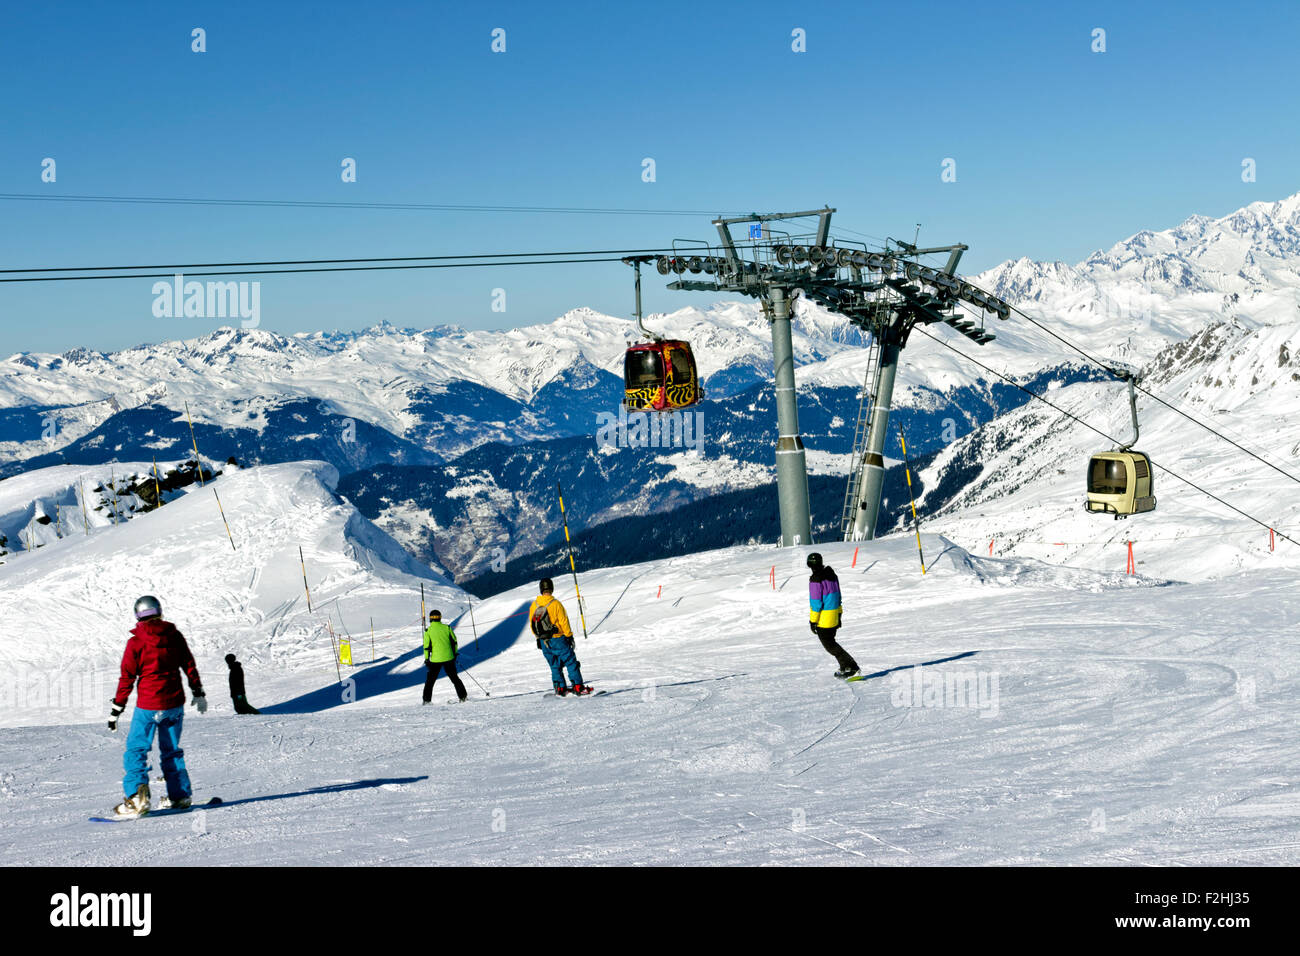 Skiing and snowboarding in high mountains, with ski cable lift in the background Stock Photo